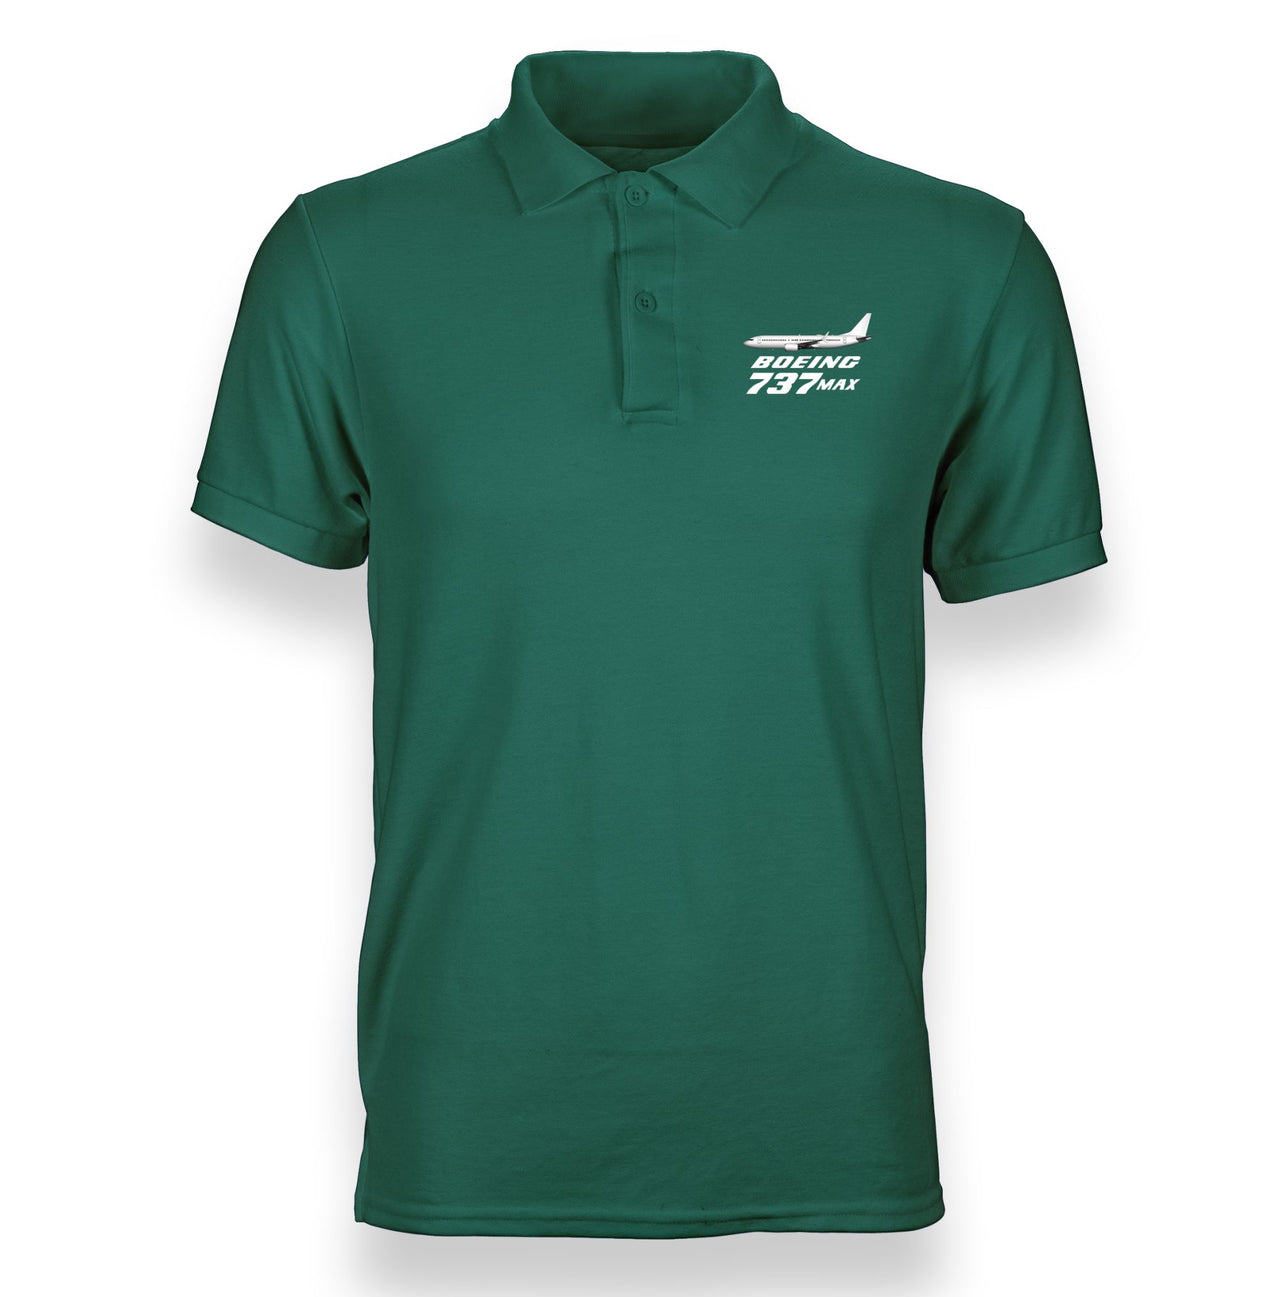 The Boeing 737Max Designed "WOMEN" Polo T-Shirts